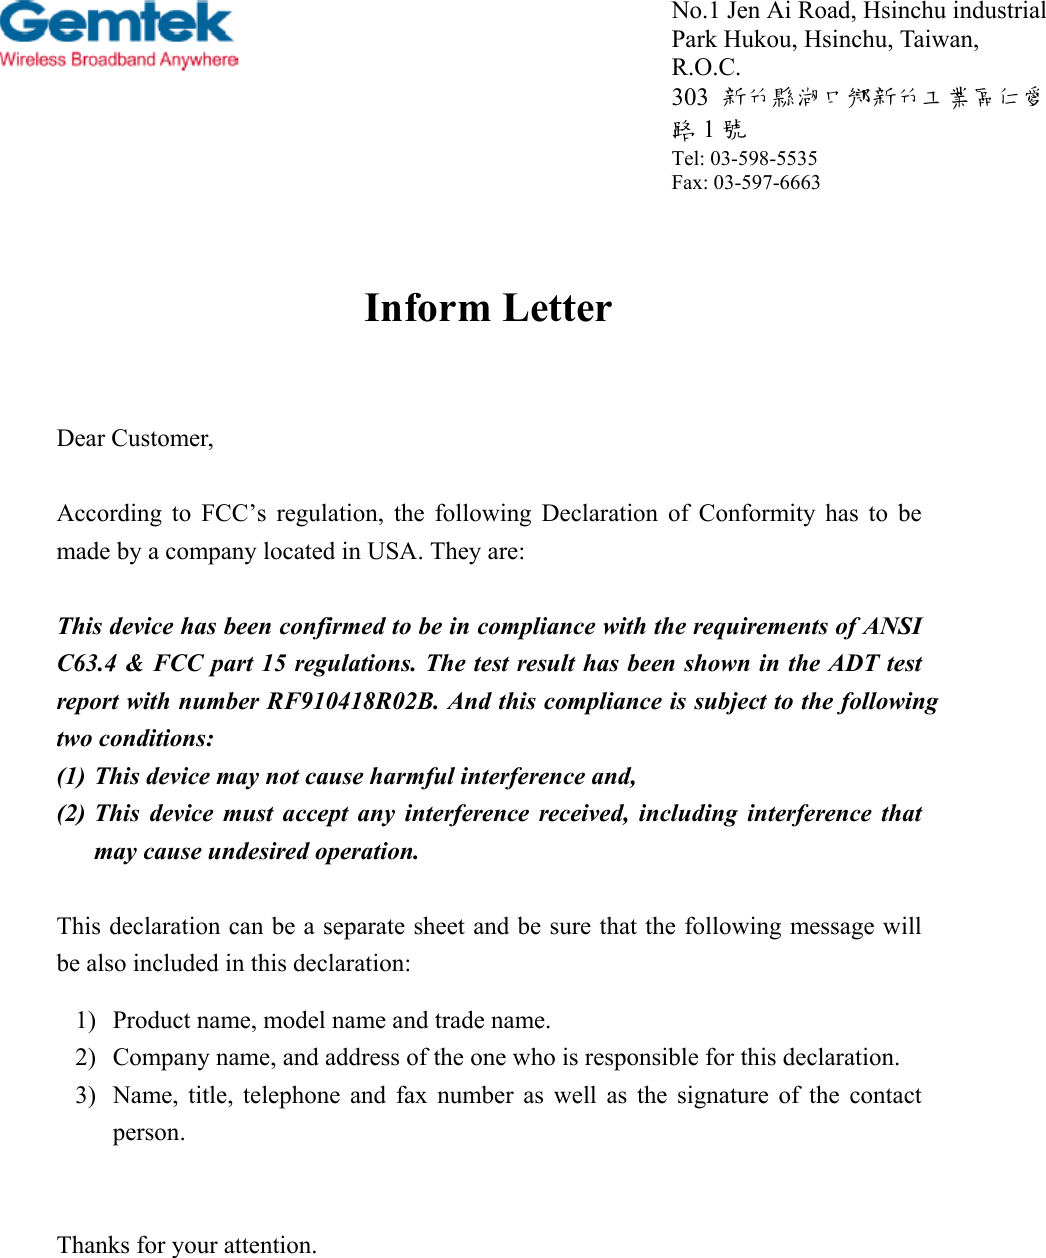 Inform LetterDear Customer,According to FCC’s regulation, the following Declaration of Conformity has to bemade by a company located in USA. They are:This device has been confirmed to be in compliance with the requirements of ANSIC63.4 &amp; FCC part 15 regulations. The test result has been shown in the ADT testreport with number RF910418R02B. And this compliance is subject to the followingtwo conditions:(1) This device may not cause harmful interference and,(2) This device must accept any interference received, including interference thatmay cause undesired operation.This declaration can be a separate sheet and be sure that the following message willbe also included in this declaration:1) Product name, model name and trade name.2) Company name, and address of the one who is responsible for this declaration.3) Name, title, telephone and fax number as well as the signature of the contactperson.Thanks for your attention.No.1 Jen Ai Road, Hsinchu industrialPark Hukou, Hsinchu, Taiwan,R.O.C.303  新竹縣湖口鄉新竹工業區仁愛路1號Tel: 03-598-5535Fax: 03-597-6663